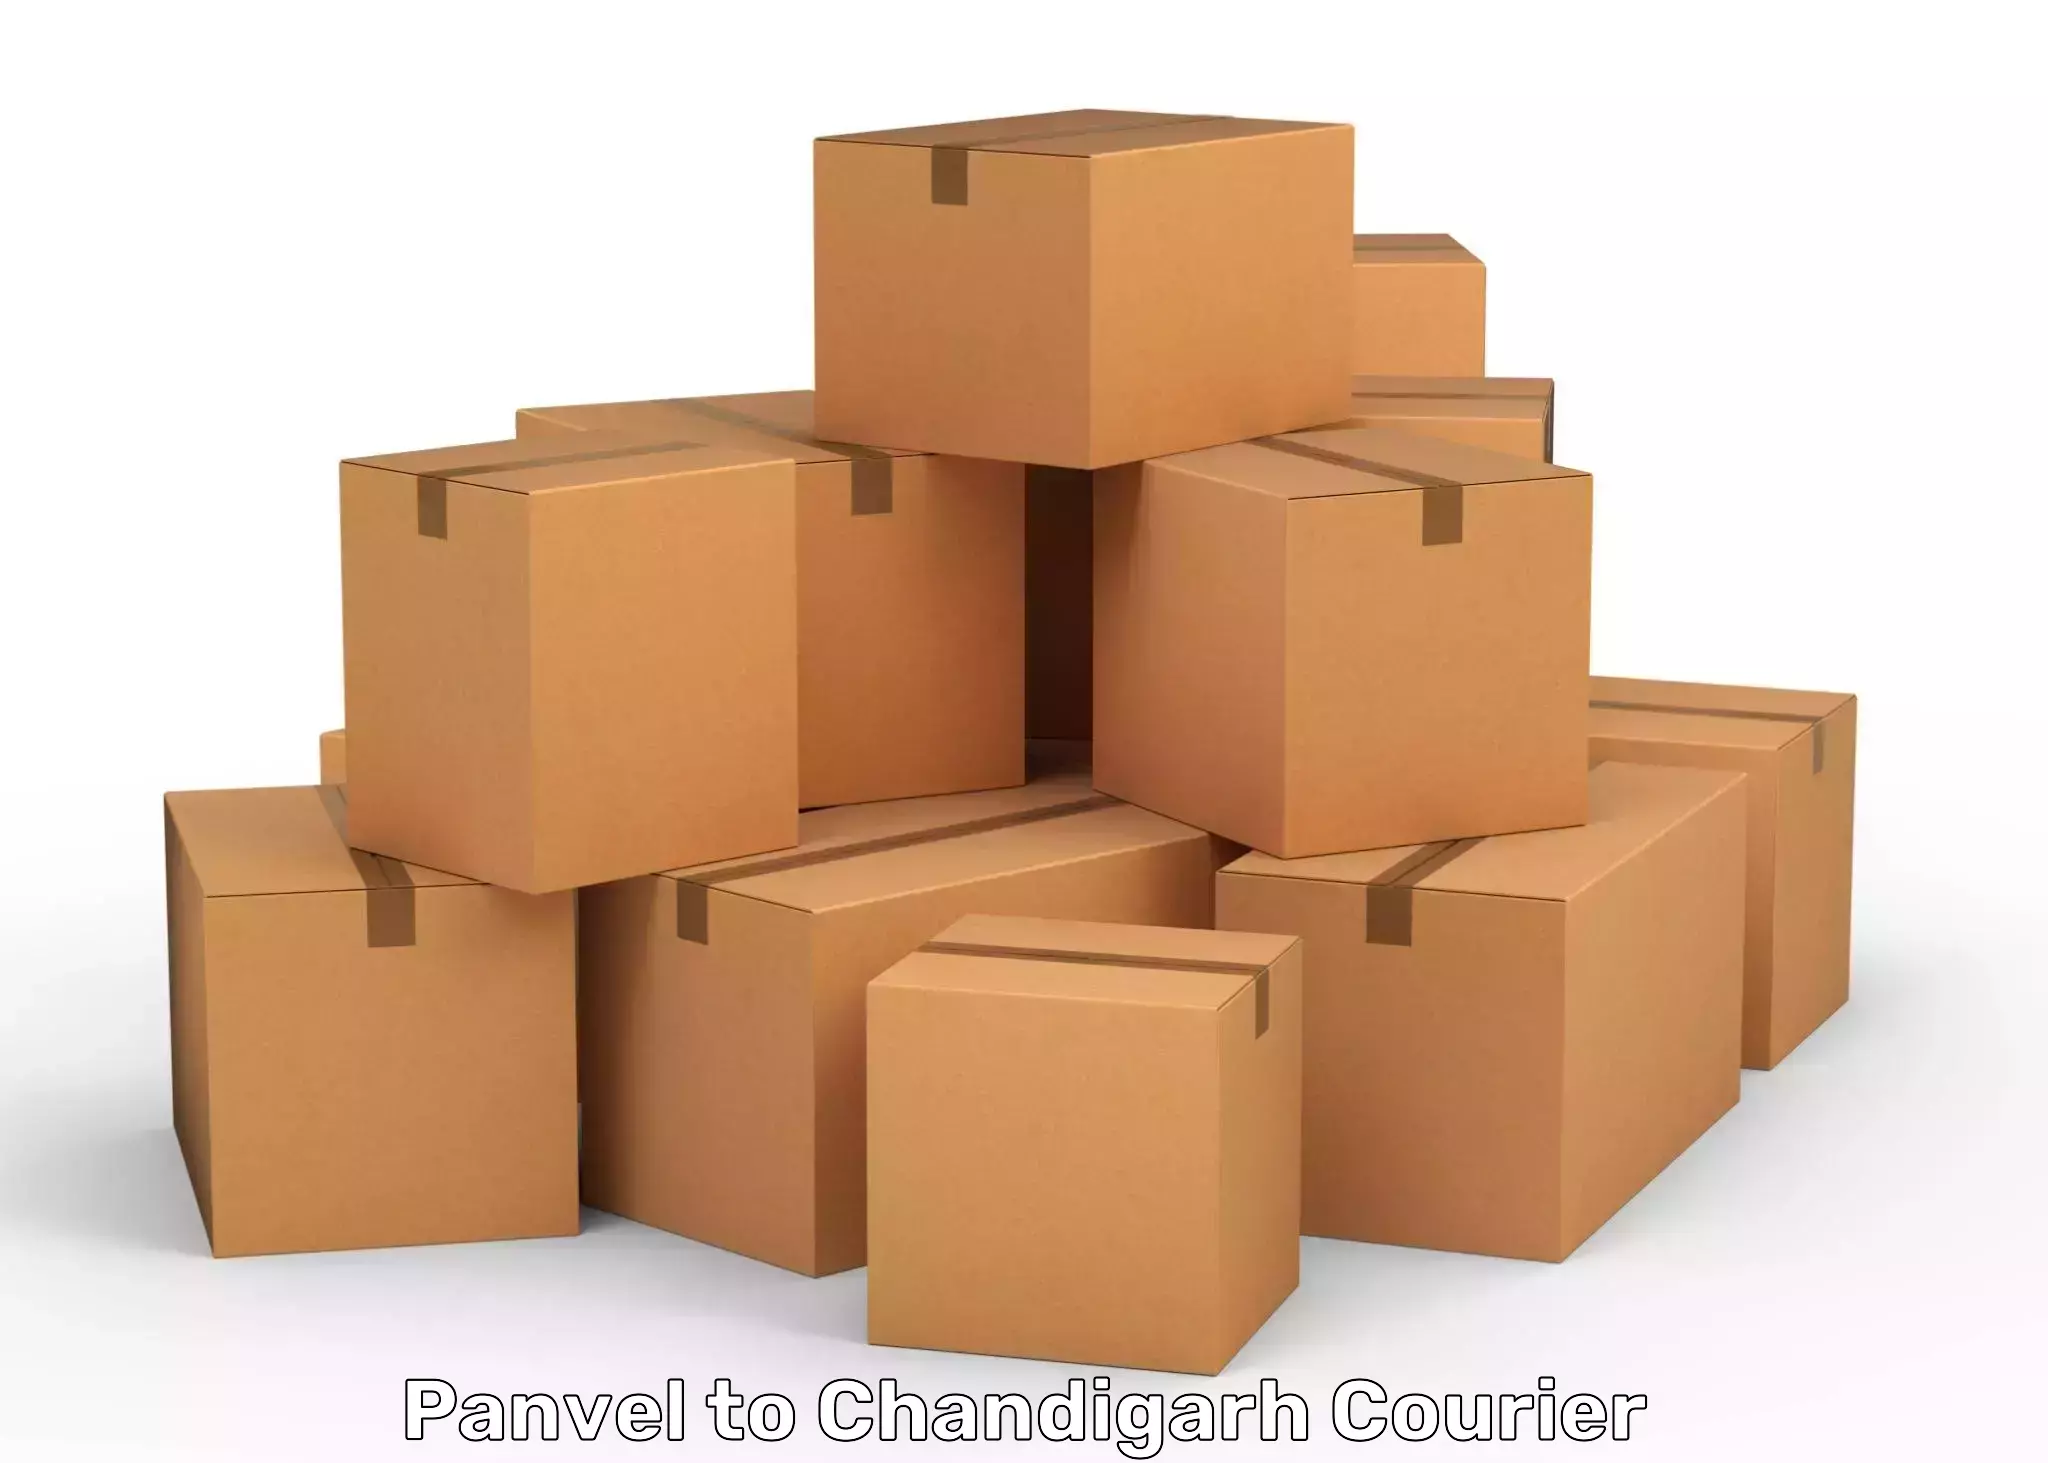 Nationwide parcel services Panvel to Chandigarh